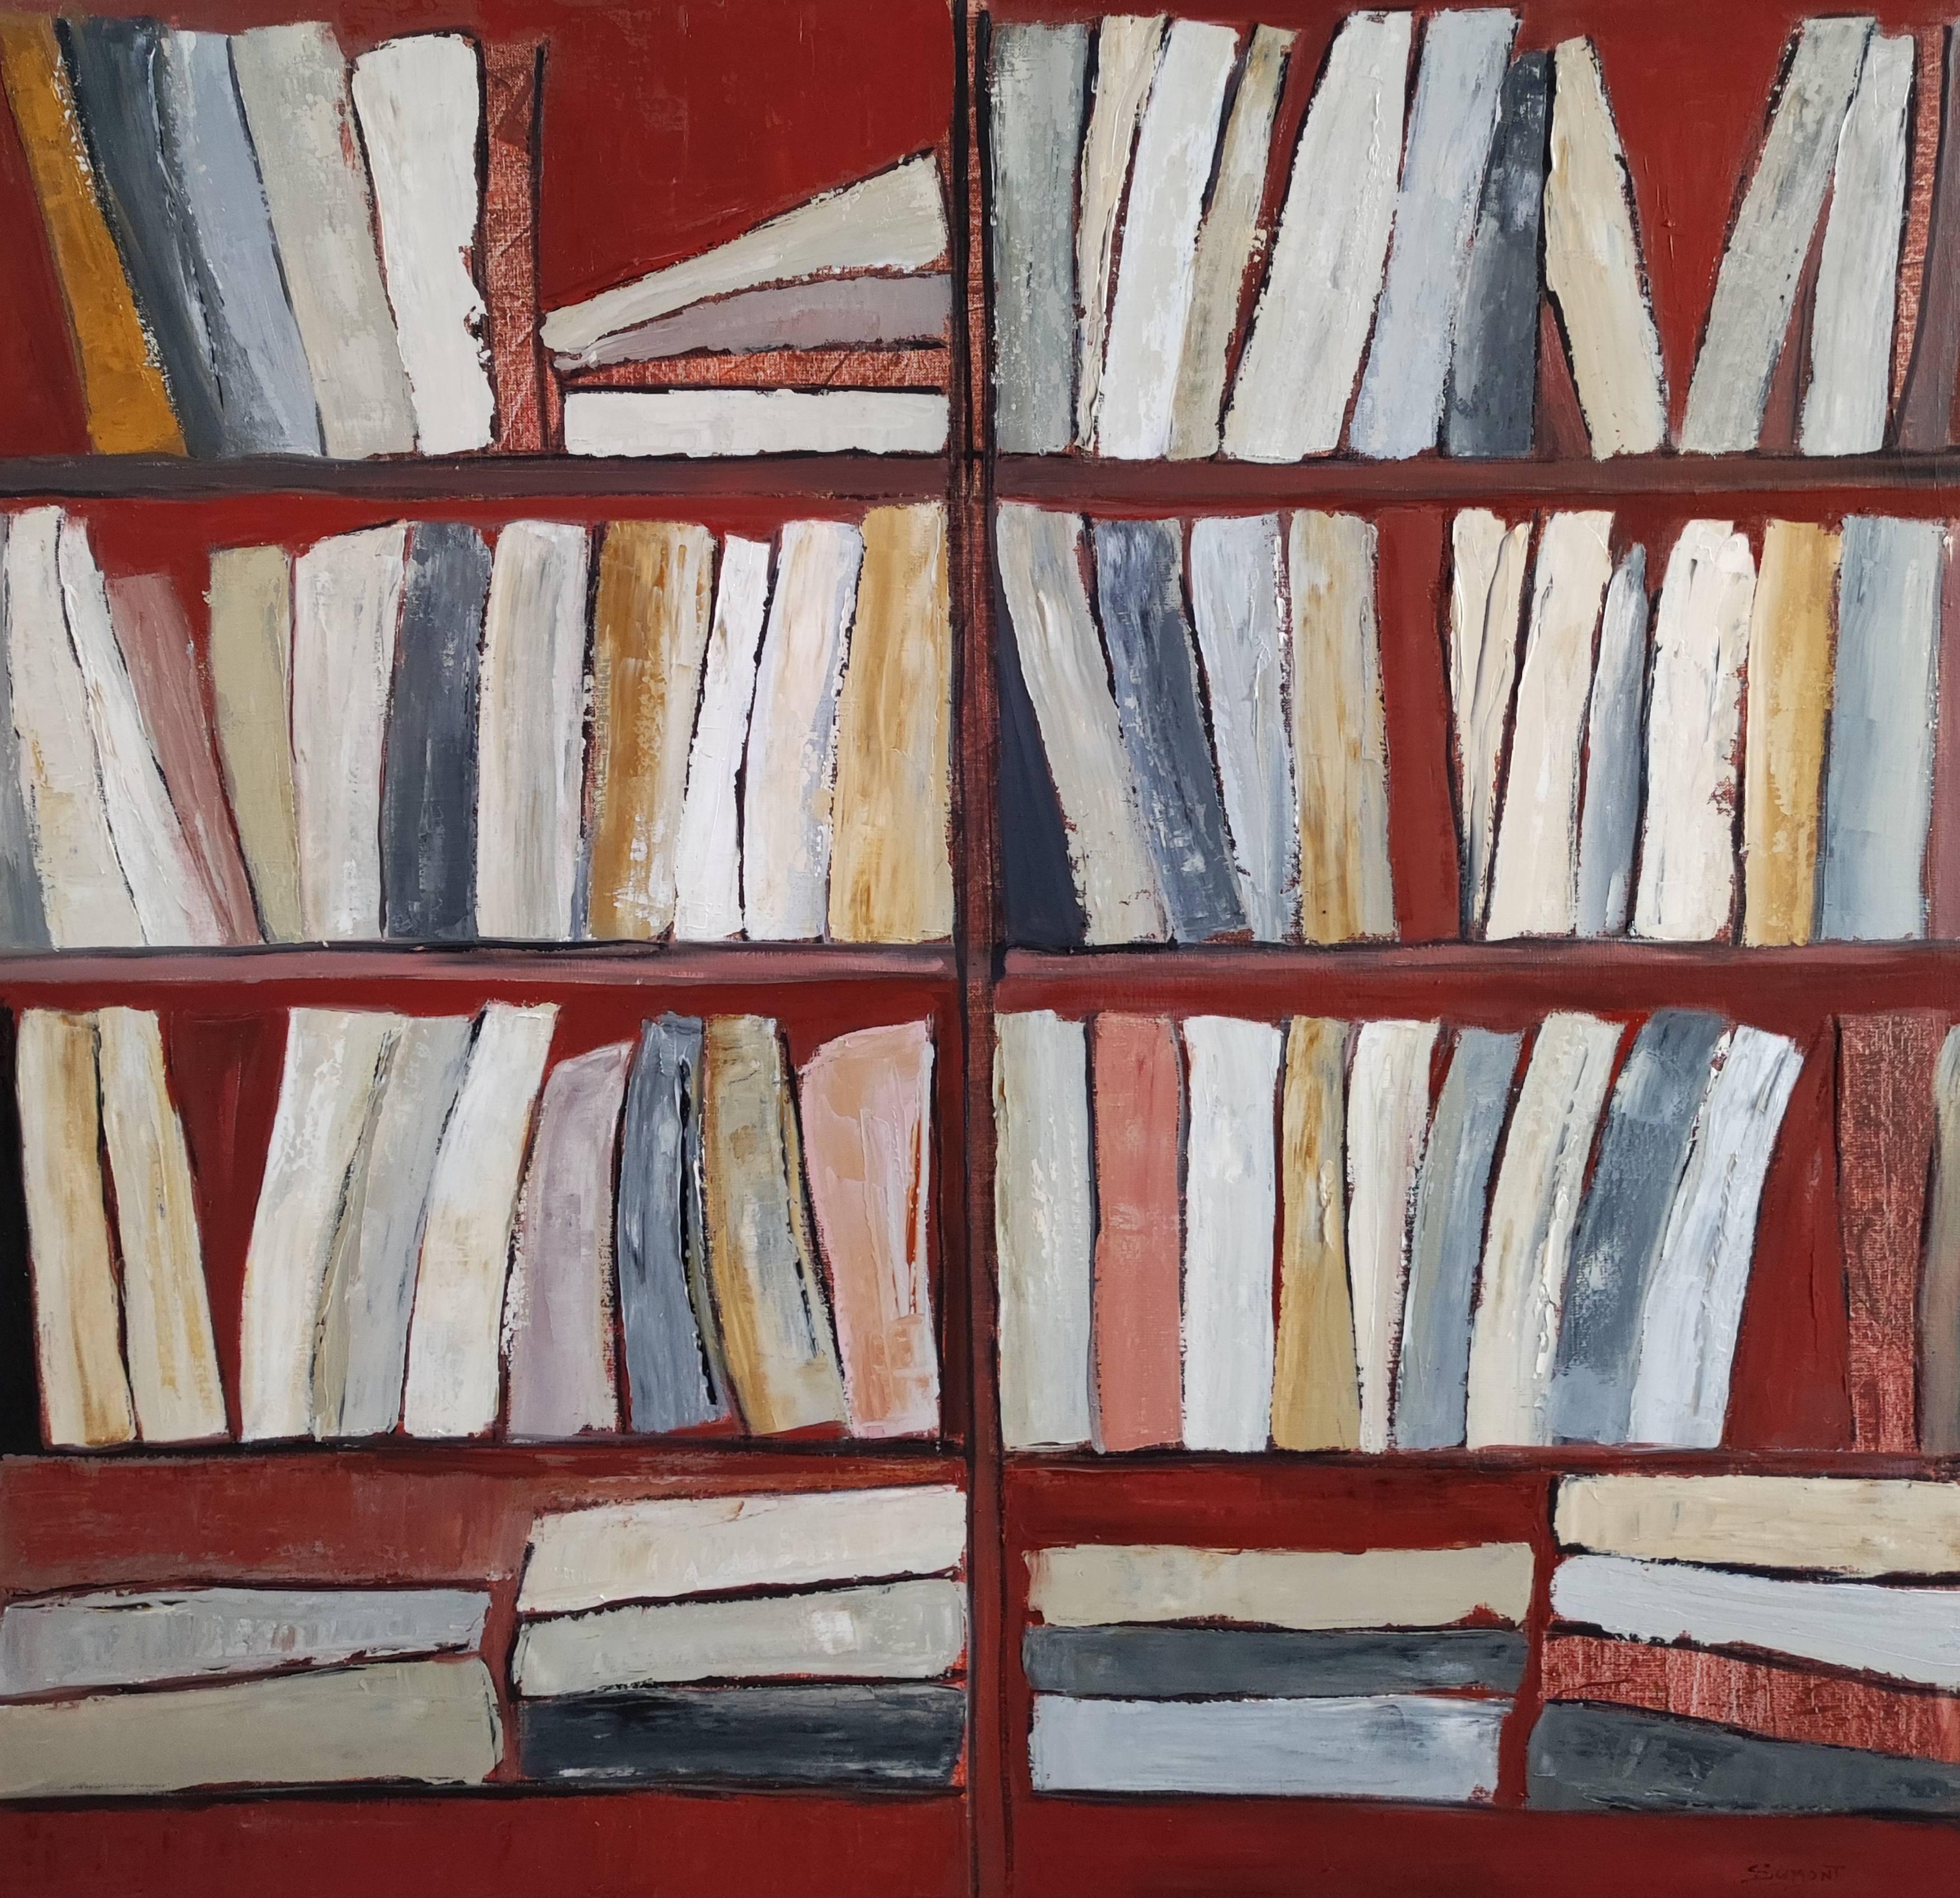 Tecke, abstract, minimalism, library series, oil on canvas, textured, books, red - Abstract Geometric Painting by SOPHIE DUMONT